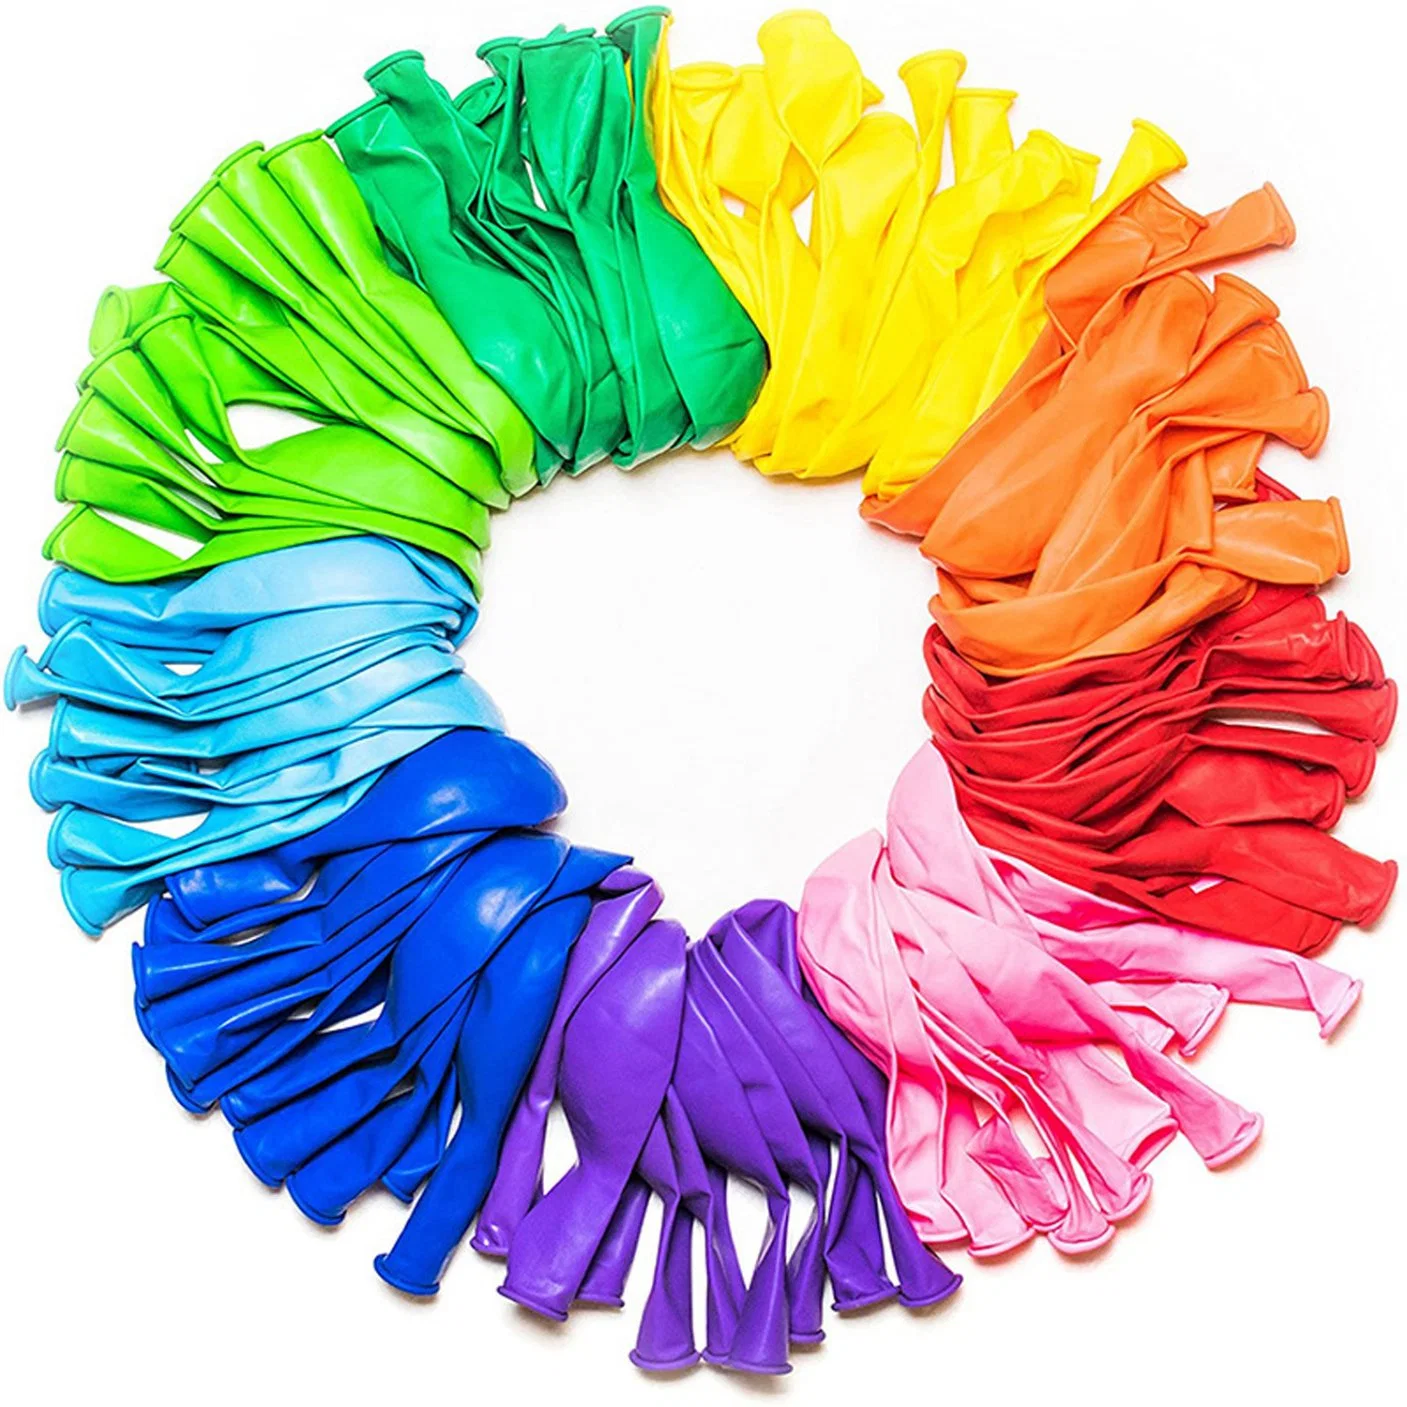 Assorted Bright Colors Balloons Rainbow Set for Helium or Air Use Kids Birthday Party Decoration Accessory